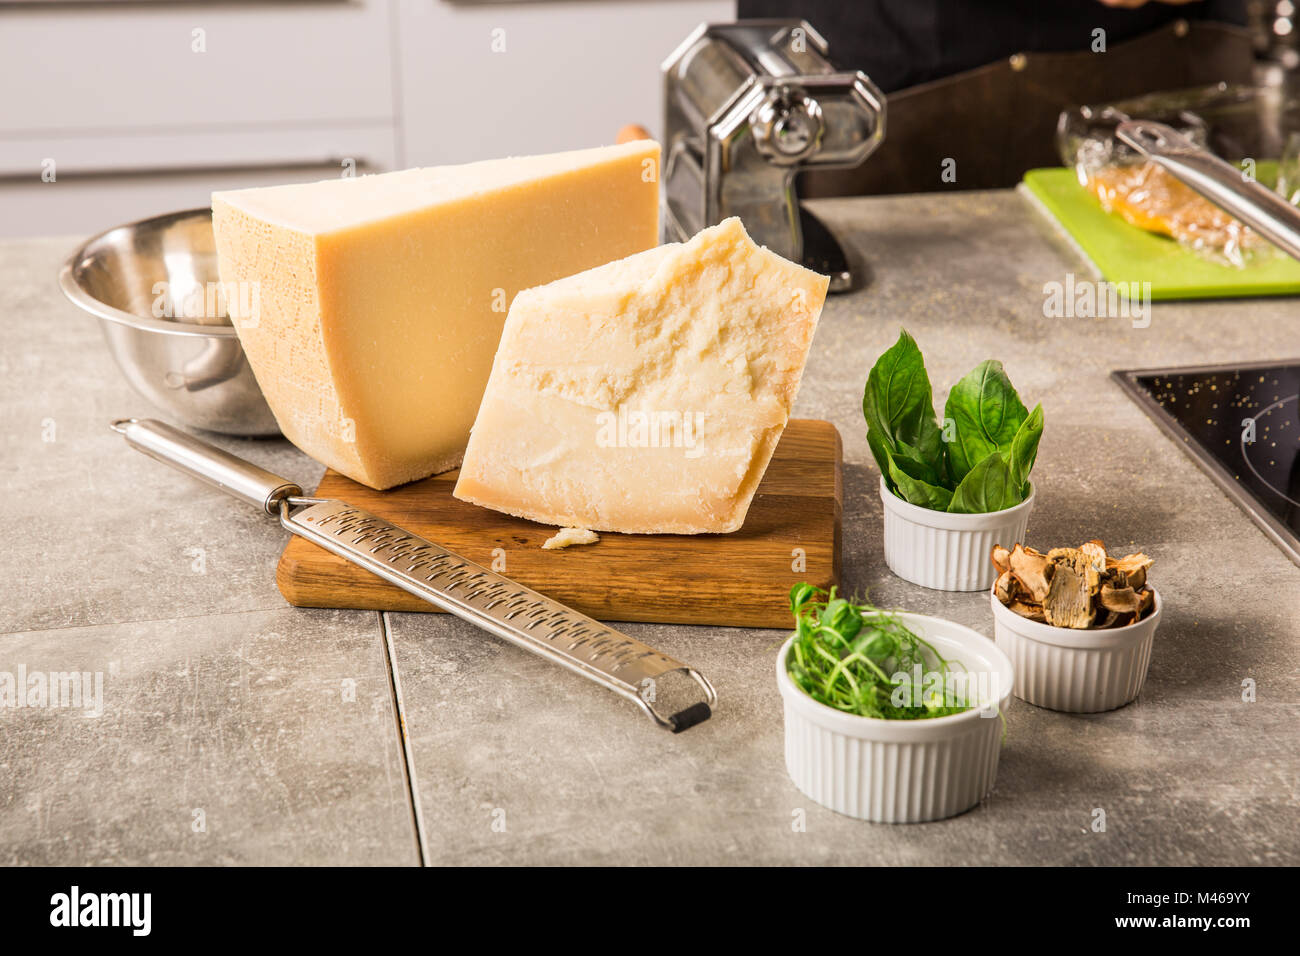 grated parmesan cheese and metal grater on wooden board with greenery in the kitchen Stock Photo